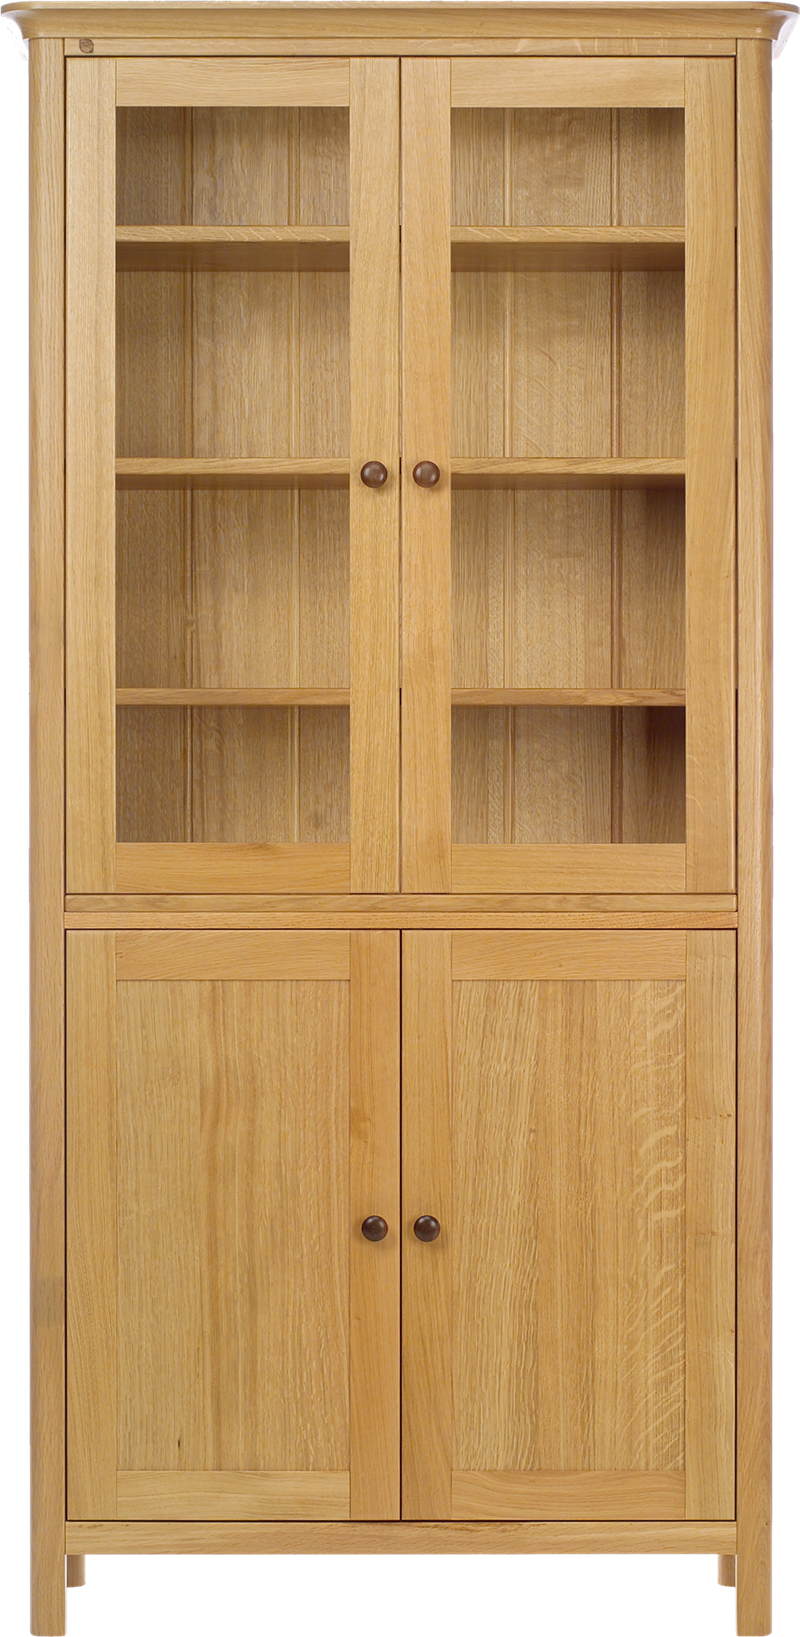 Cupboard Free HQ Image PNG Image